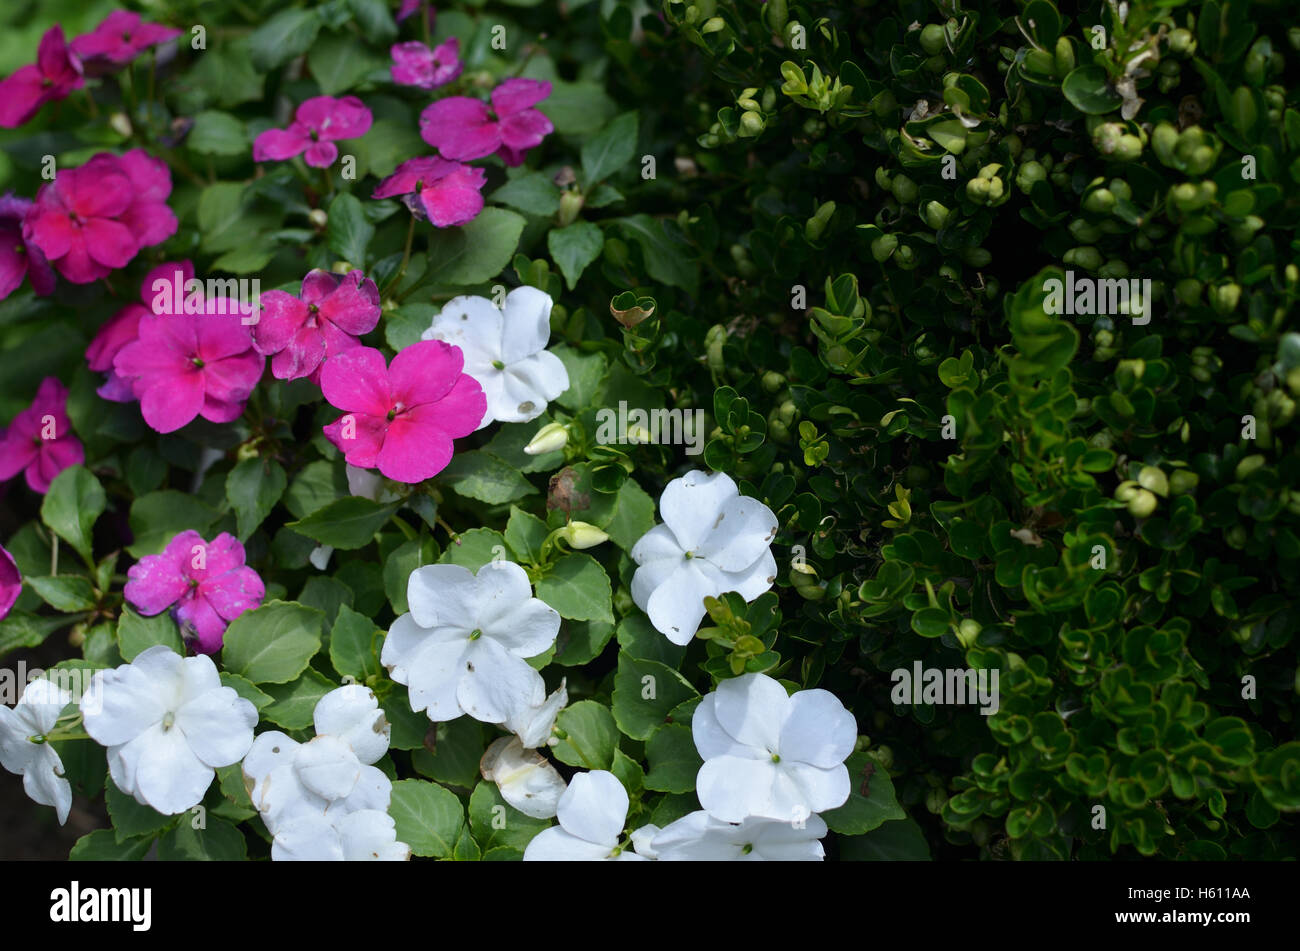 Closeup of bush of white and violet flowers in ornamental garden Stock Photo